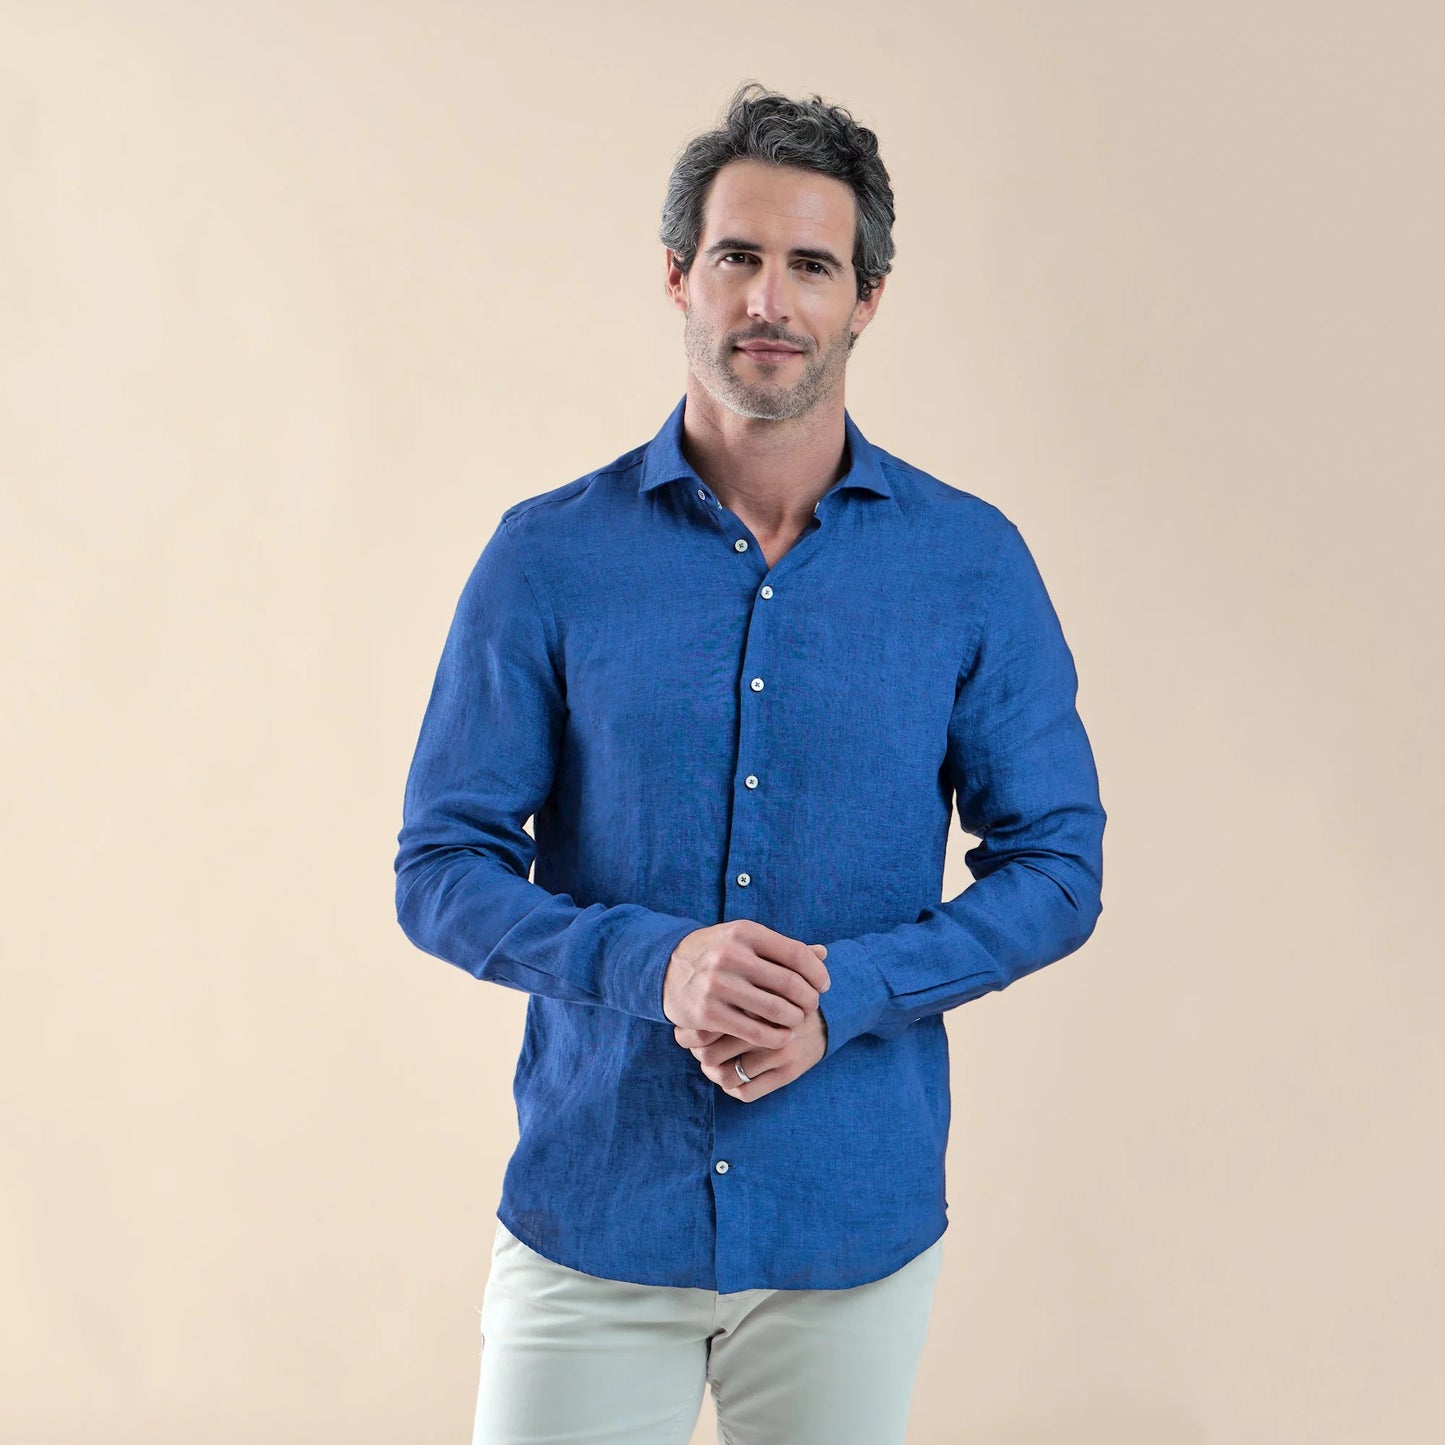 Linen shirt in navy by R2